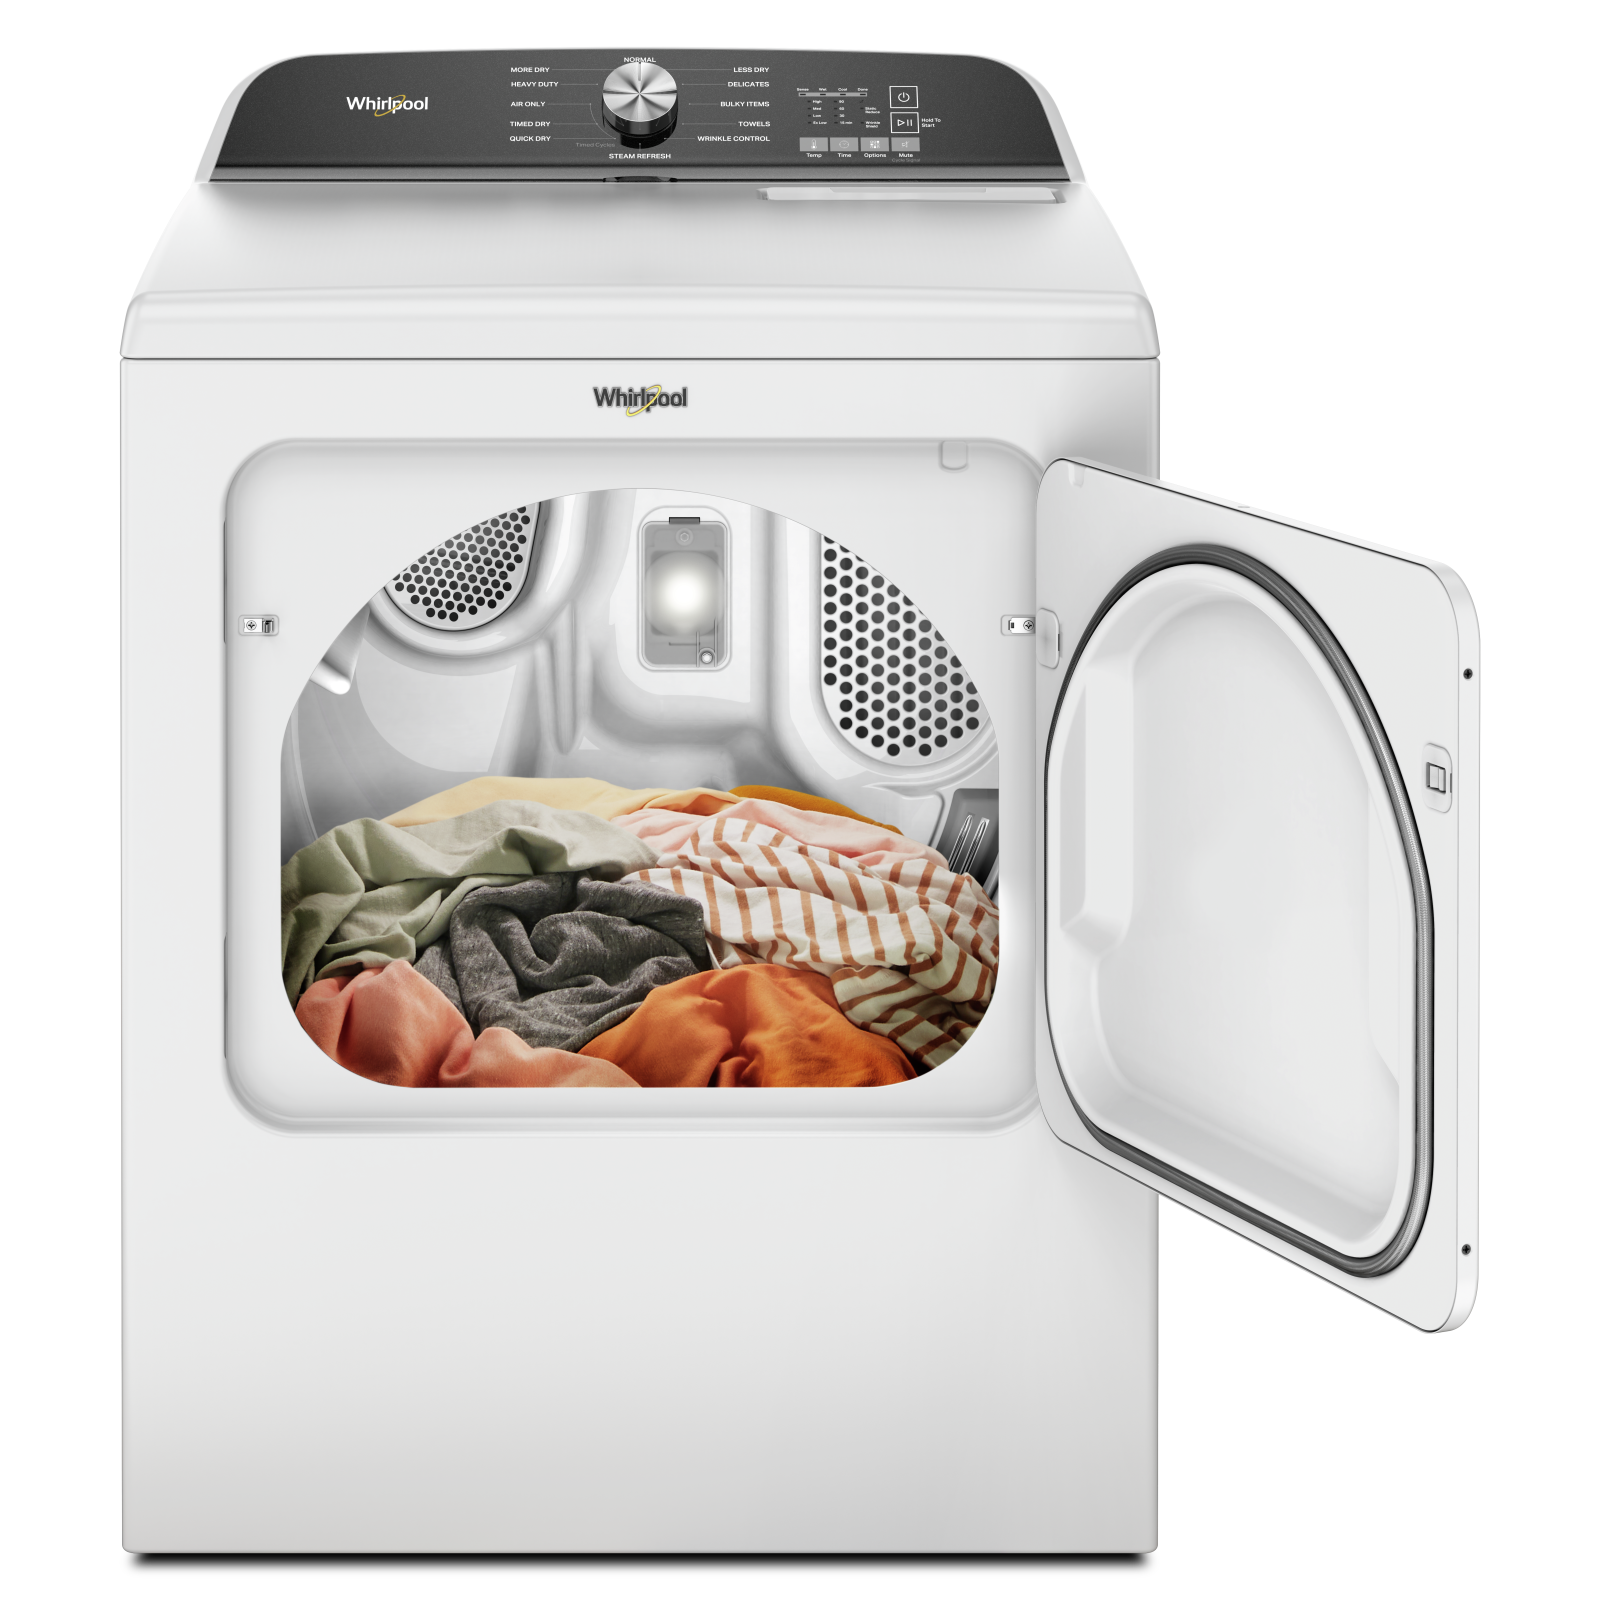 Whirlpool - 7 cu. Ft  Electric Dryer in White - YWED6150PW